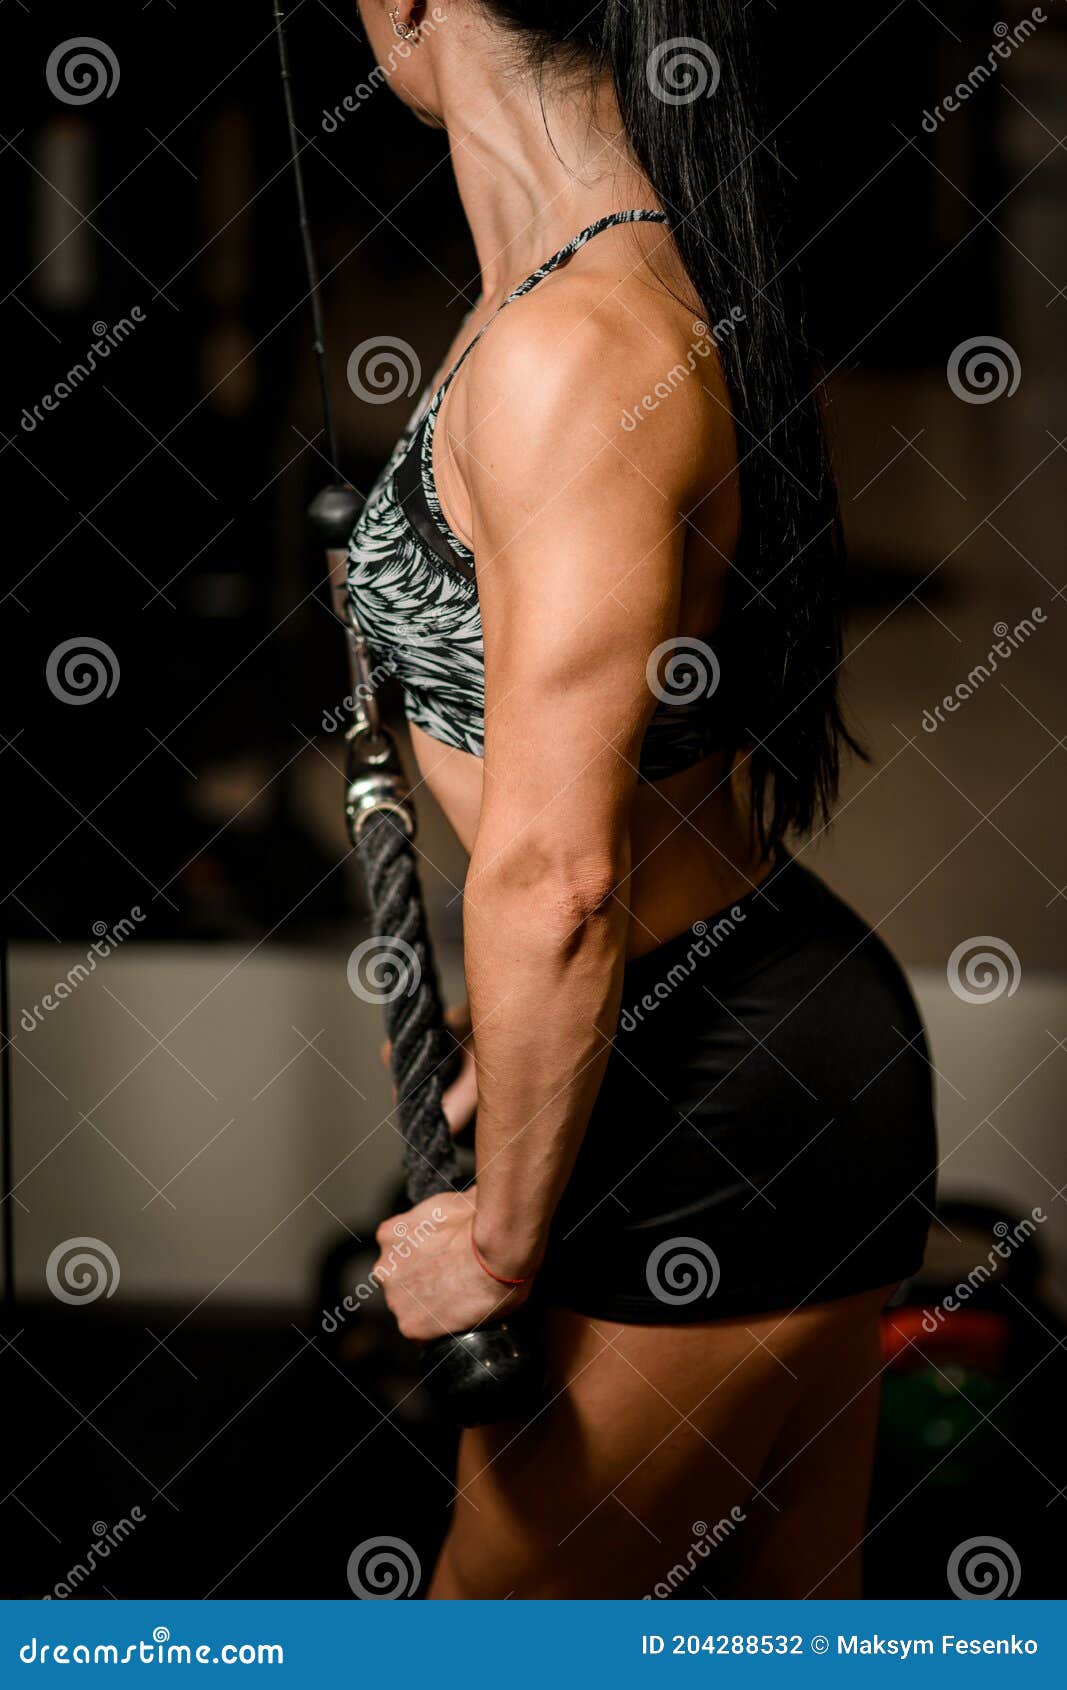 https://thumbs.dreamstime.com/z/close-up-strong-muscular-arm-woman-bodybuilder-who-train-simulator-fitness-club-close-up-strong-muscular-arm-204288532.jpg